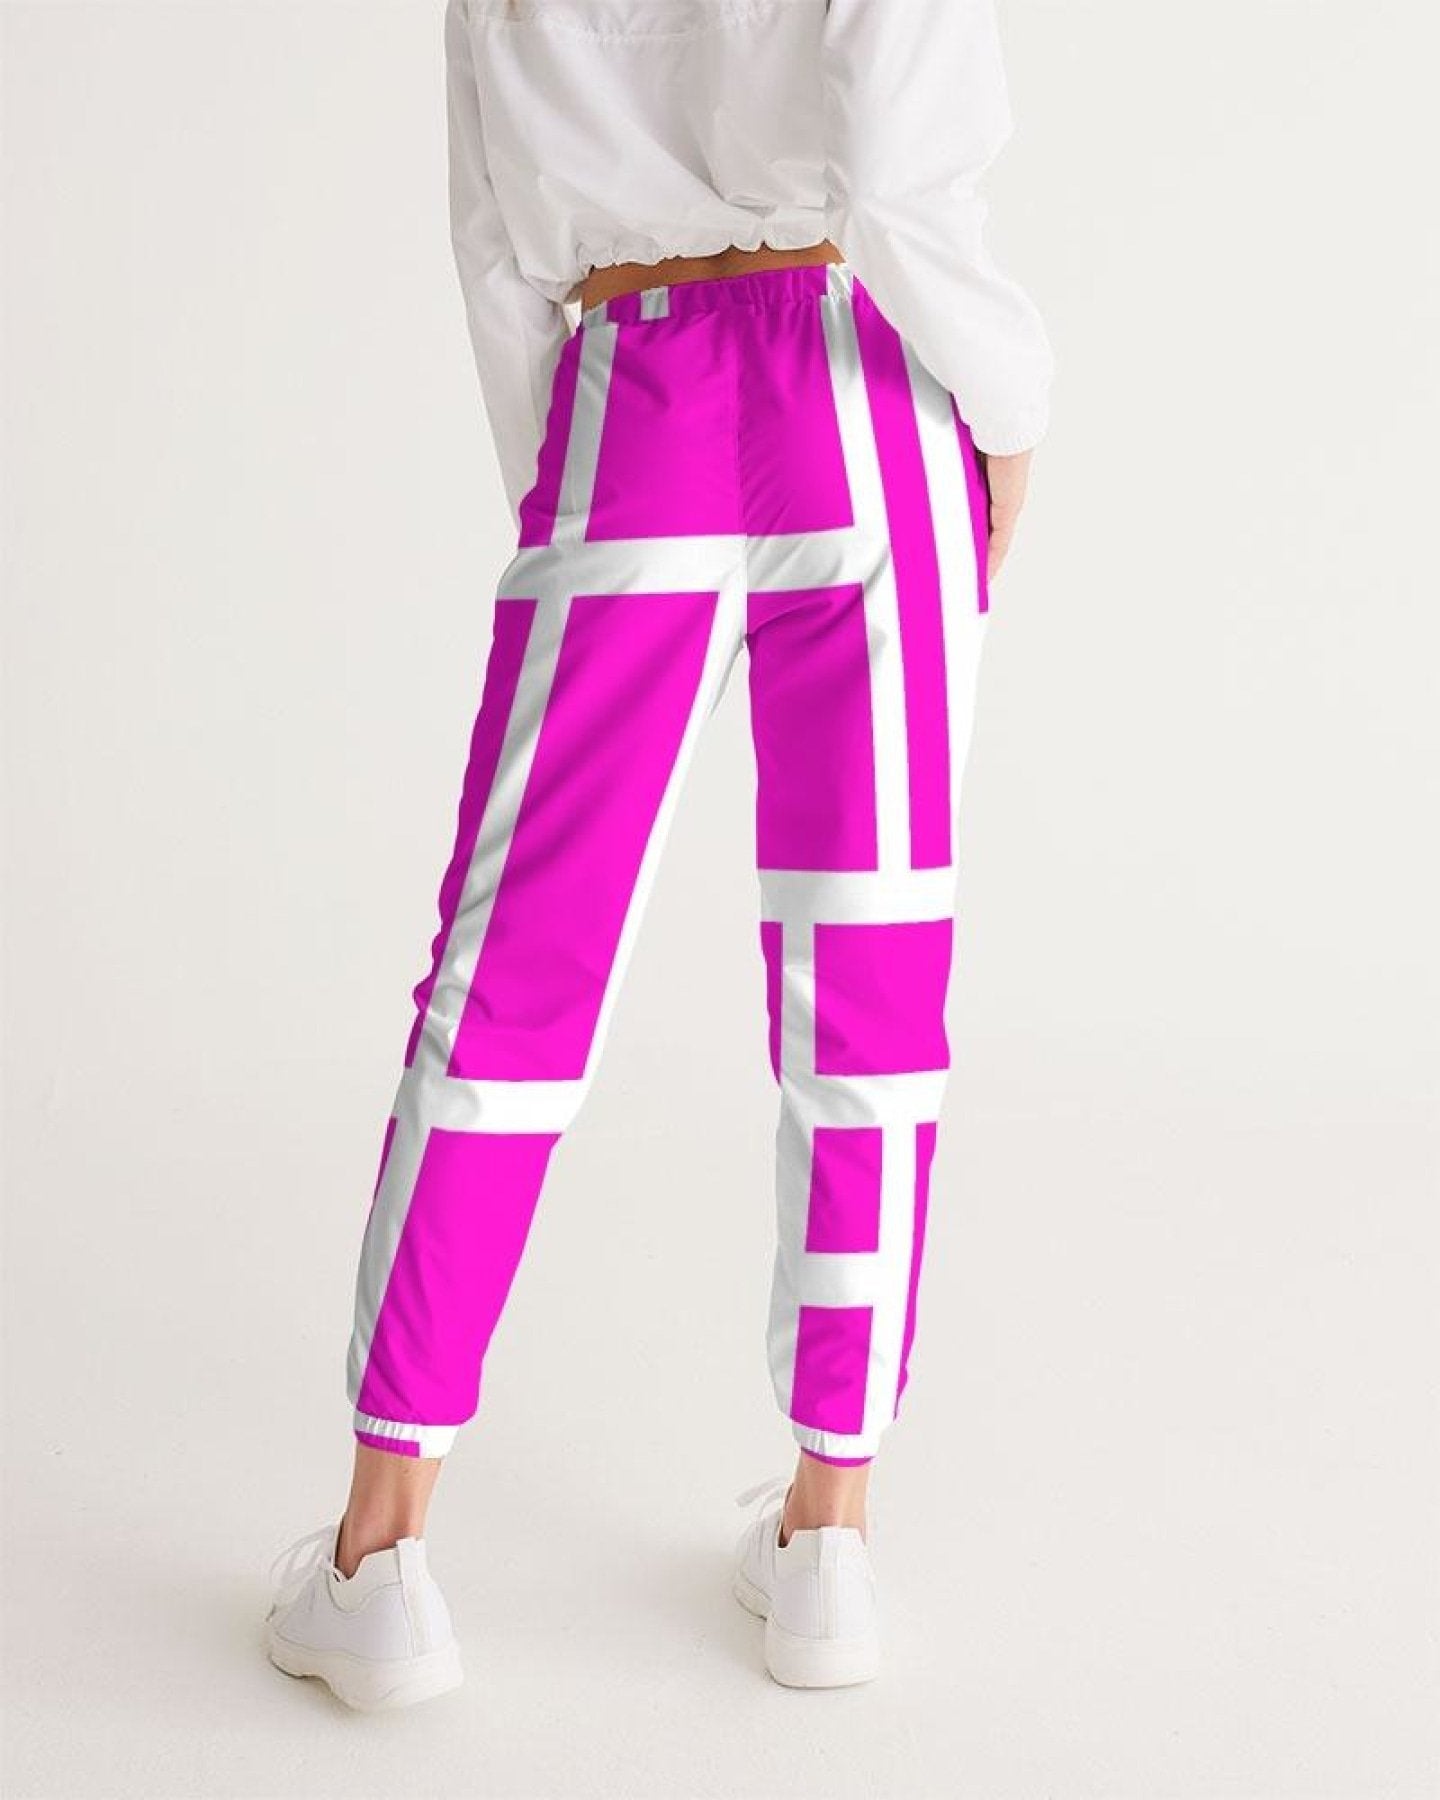 Womens Track Pants - Pink & White Block Grid Graphic Sports Pants